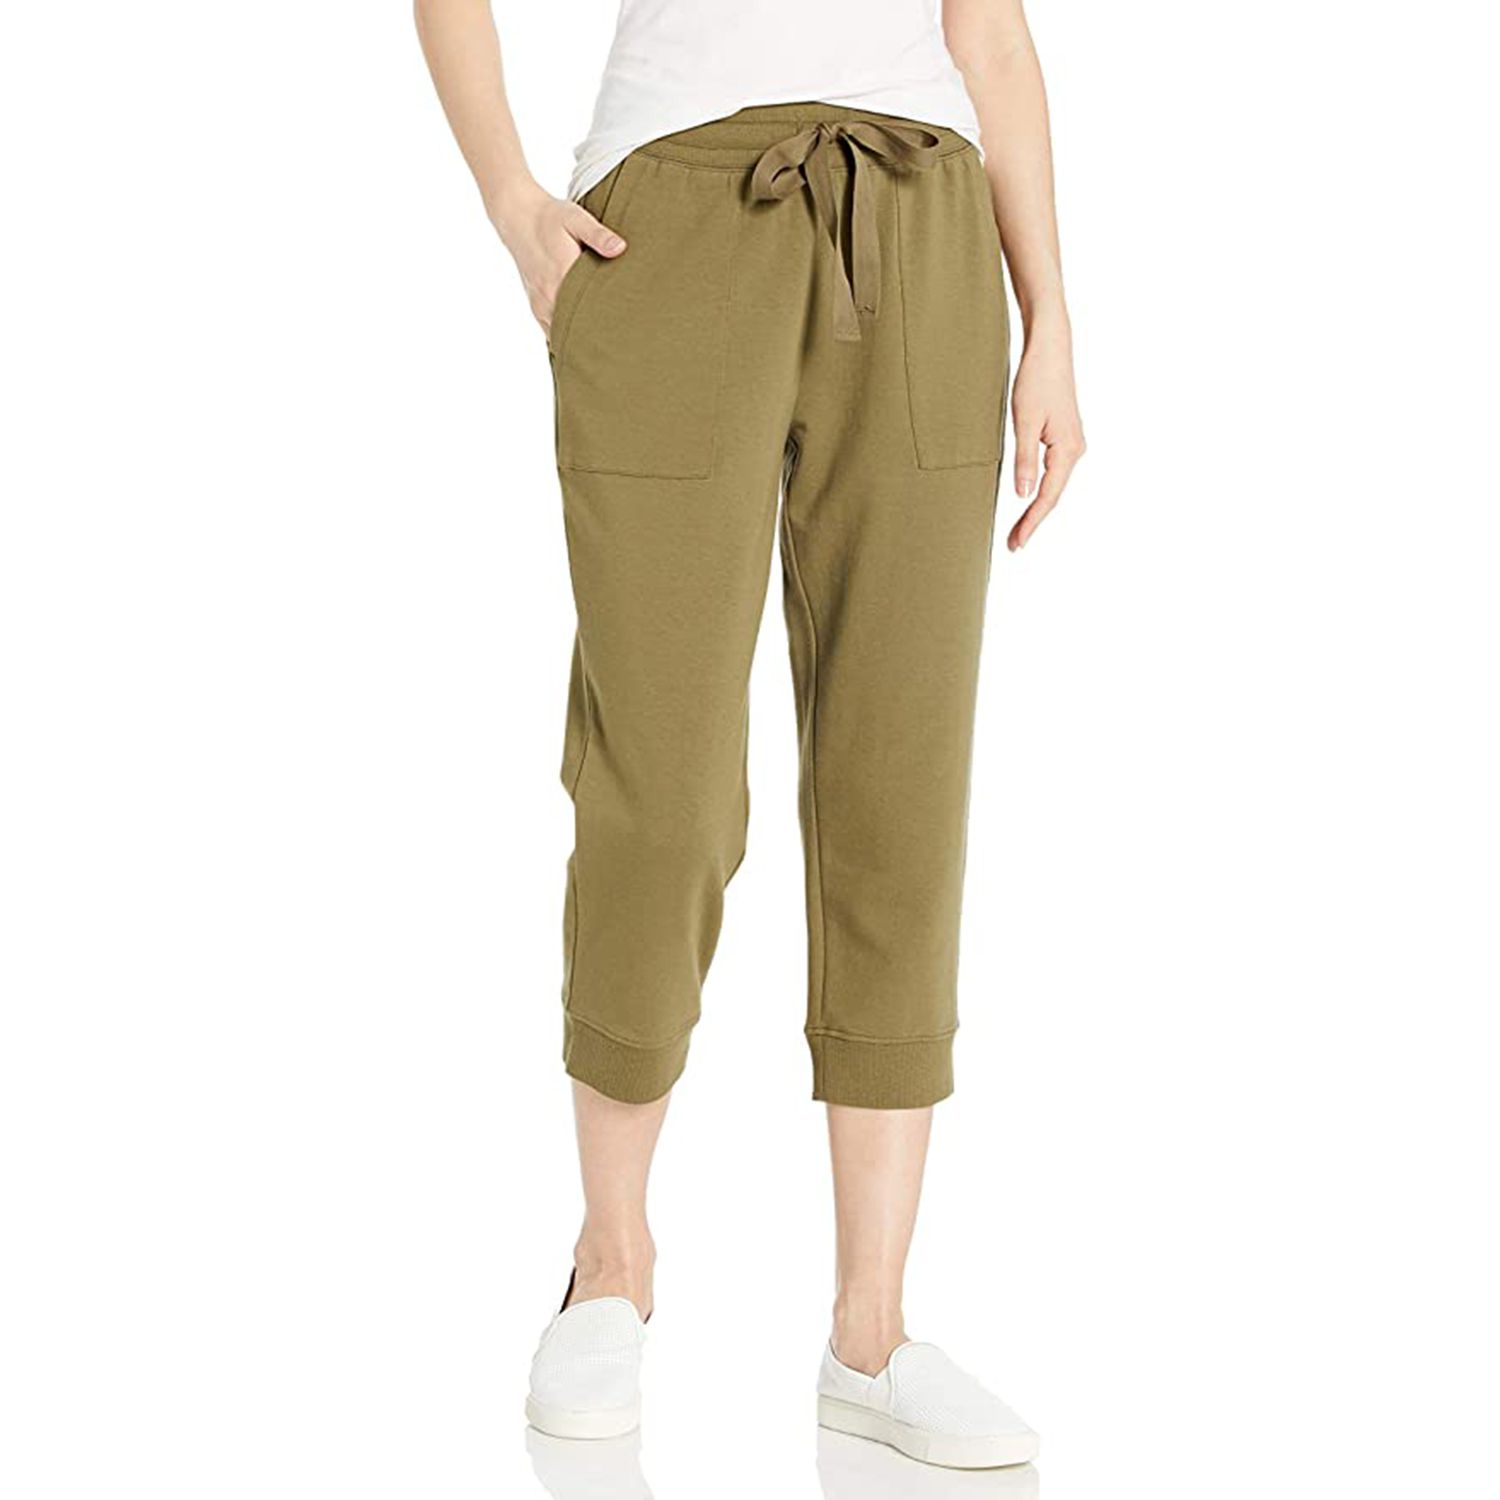 Daily Ritual Cropped Joggers Are Perfect for Spring Weather | PEOPLE.com